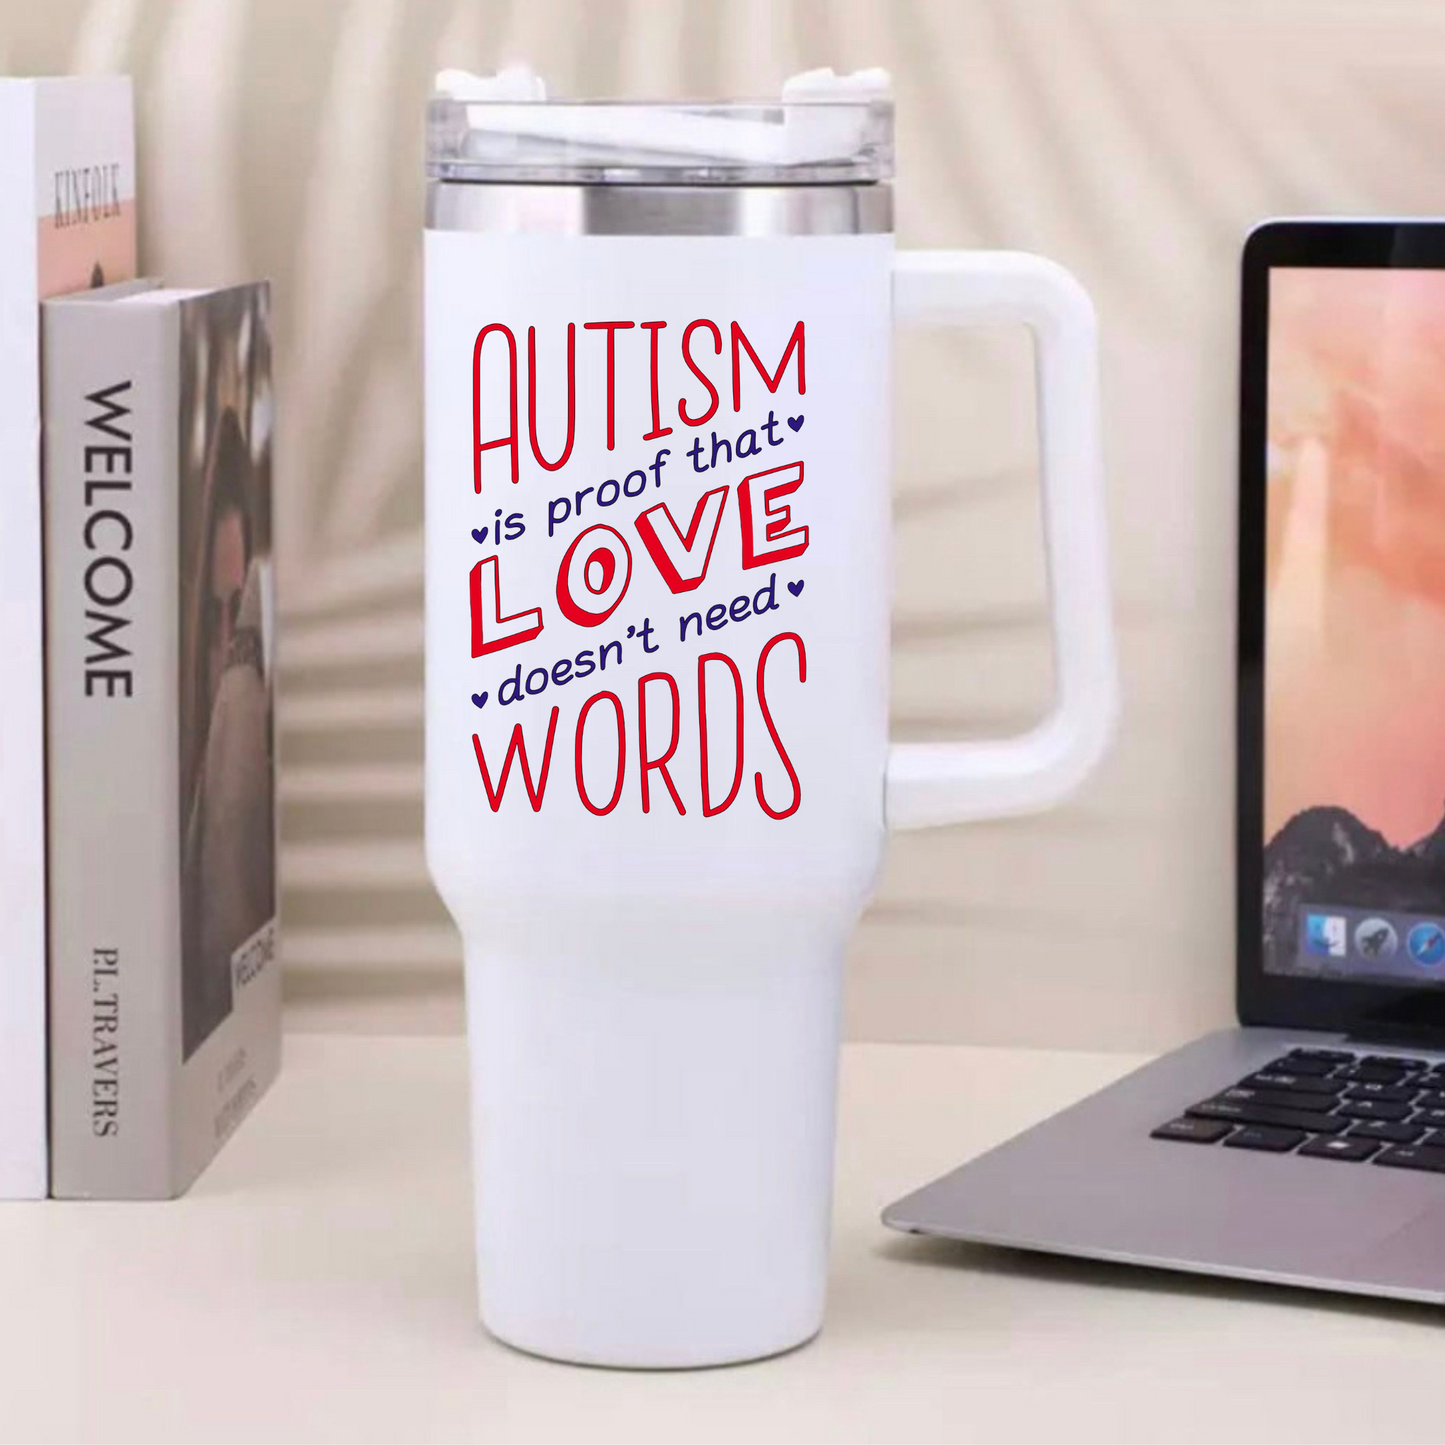 AUTISM IS PROVE LOVE DOESN’T NEED ANY WORDS Tumbler - 40 oz